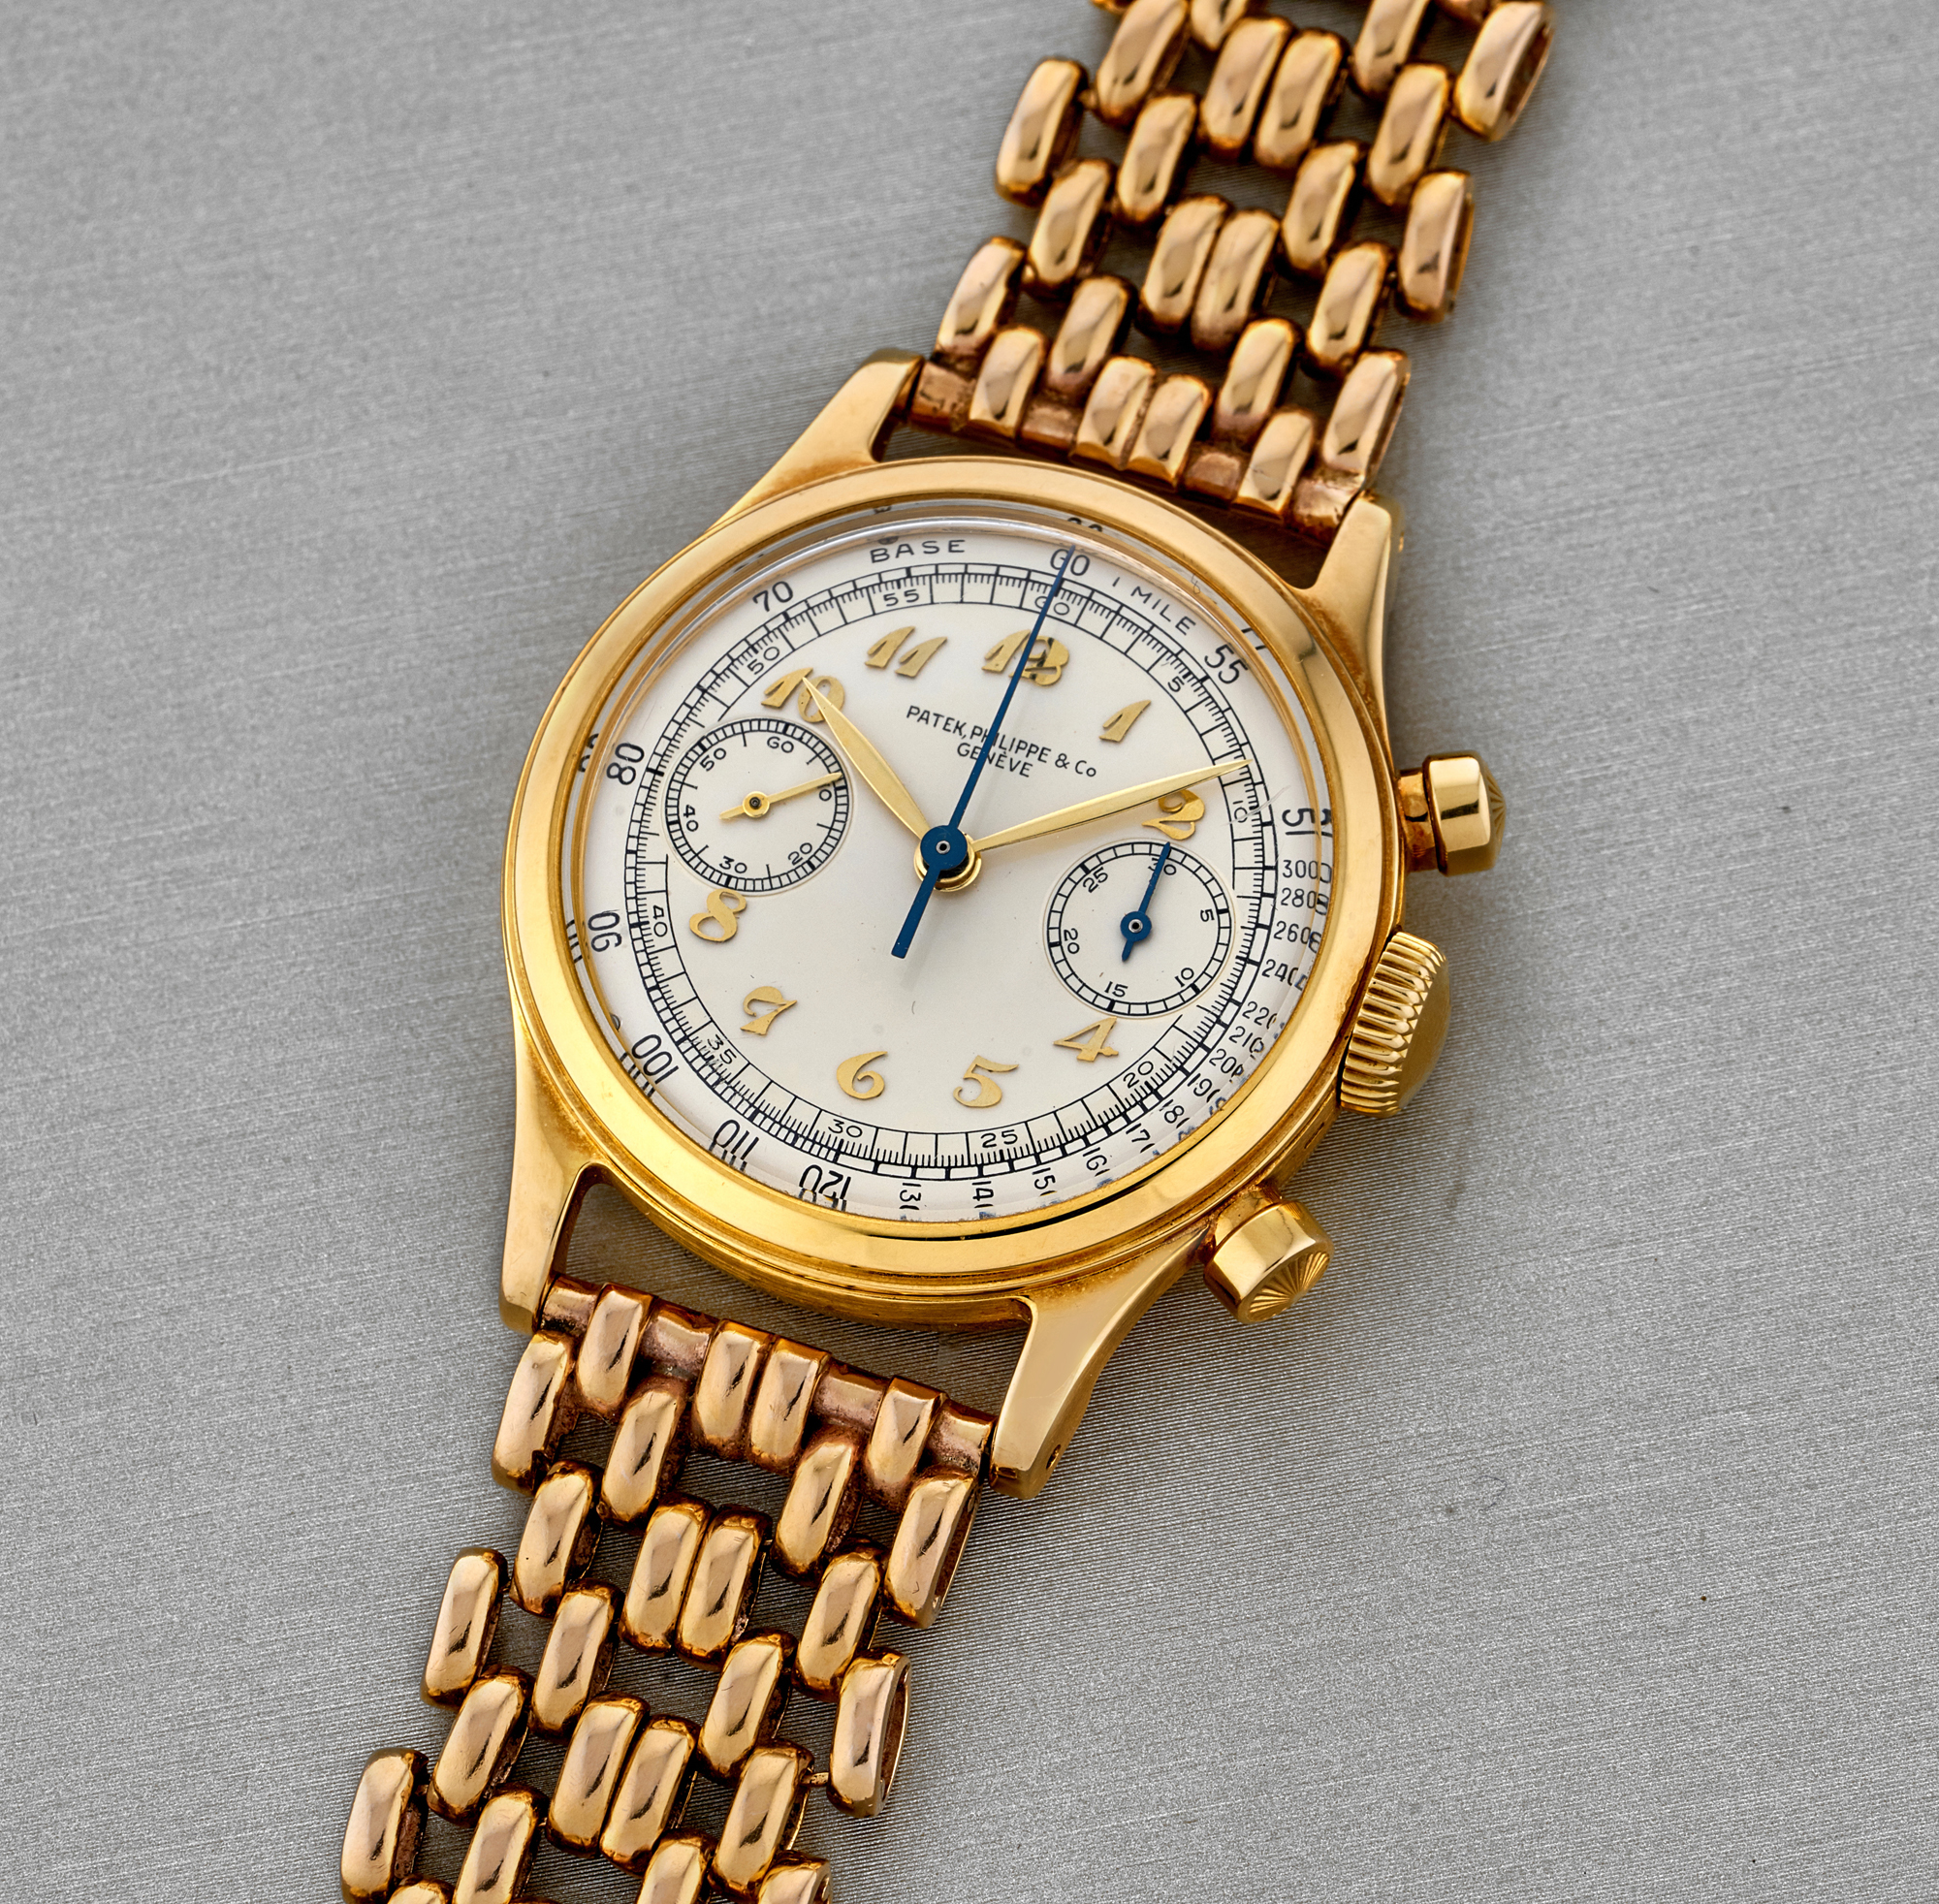 Patek Philippe. 18k gold ref. 1463J  - Manufactured in 1946 and sold in 1947